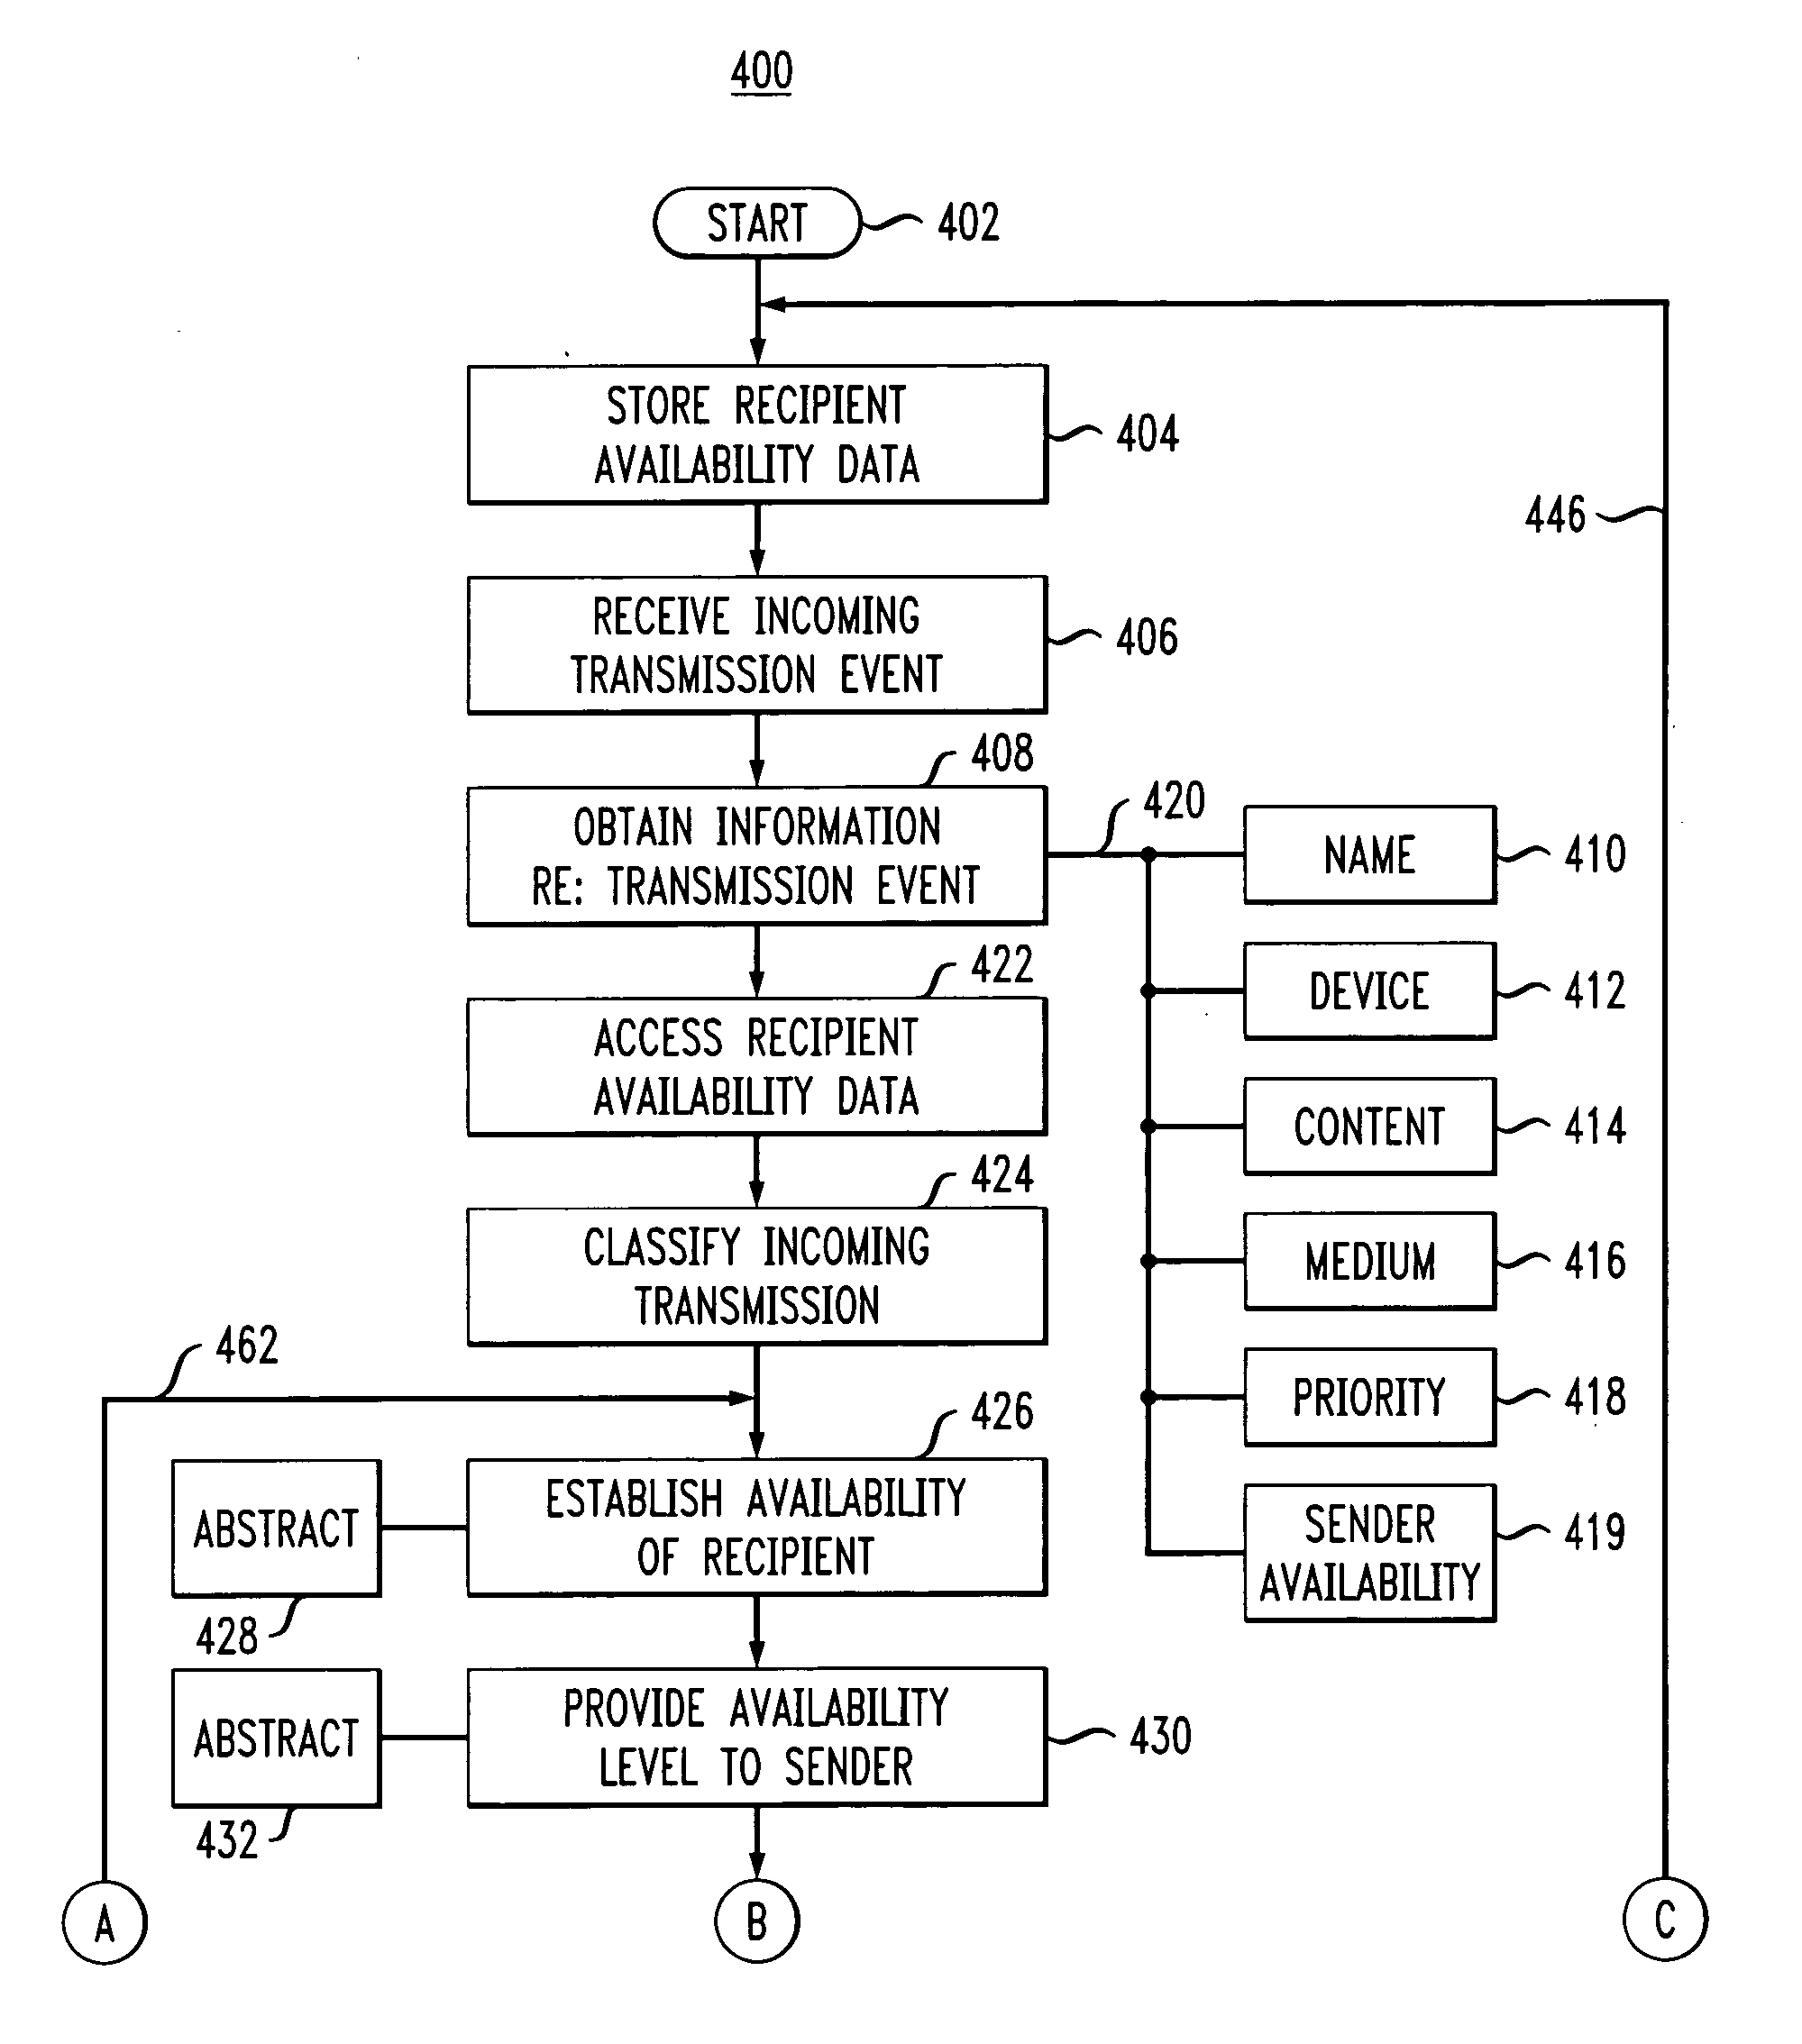 System and method for providing availability information to a user